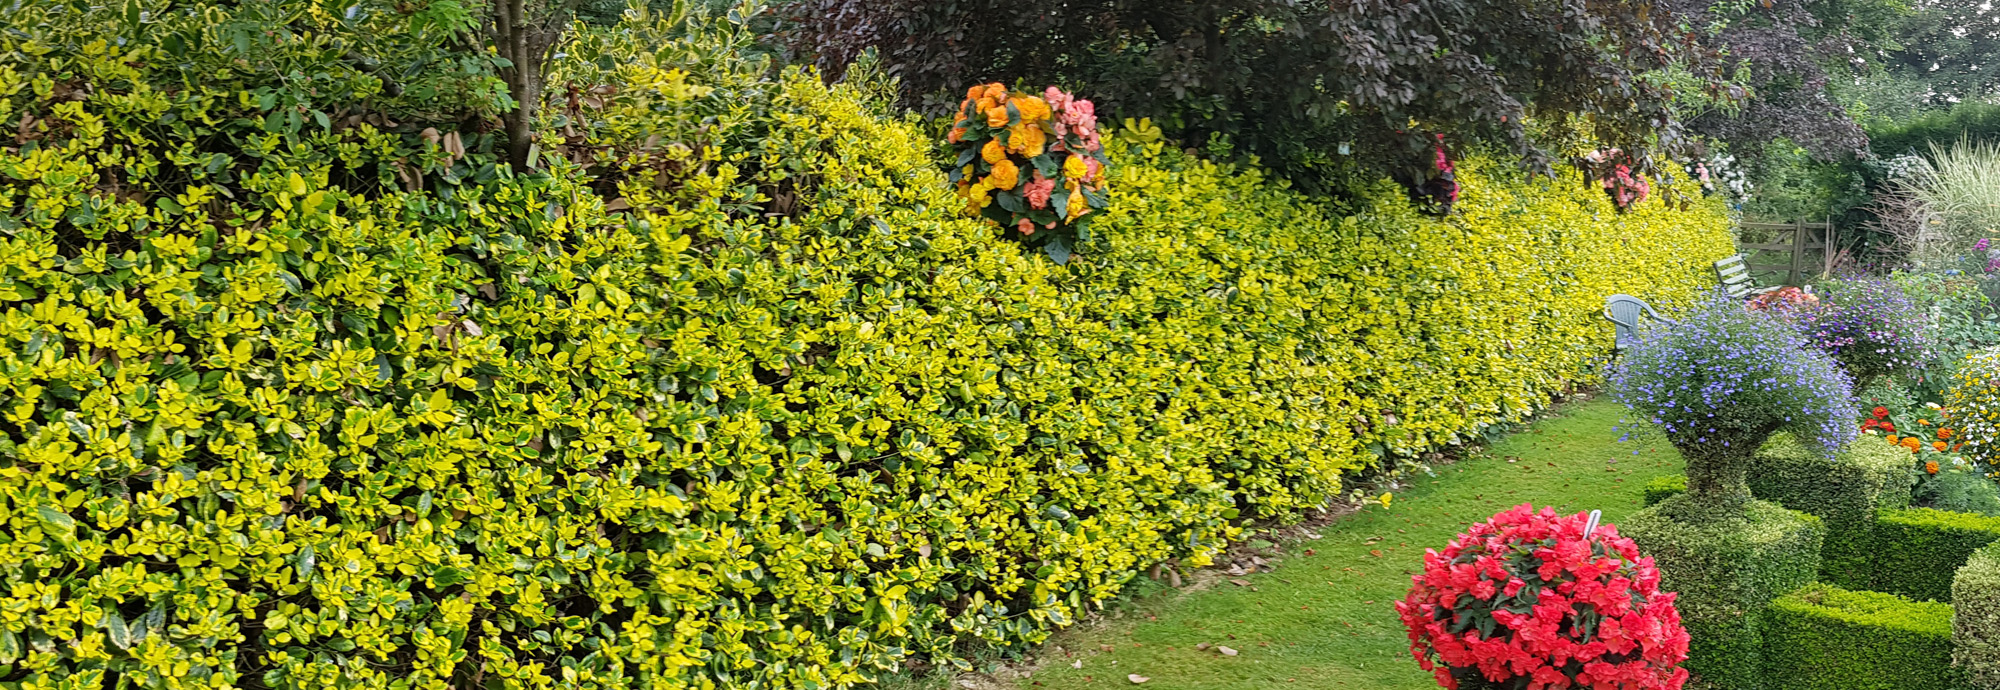 golden holly hedge